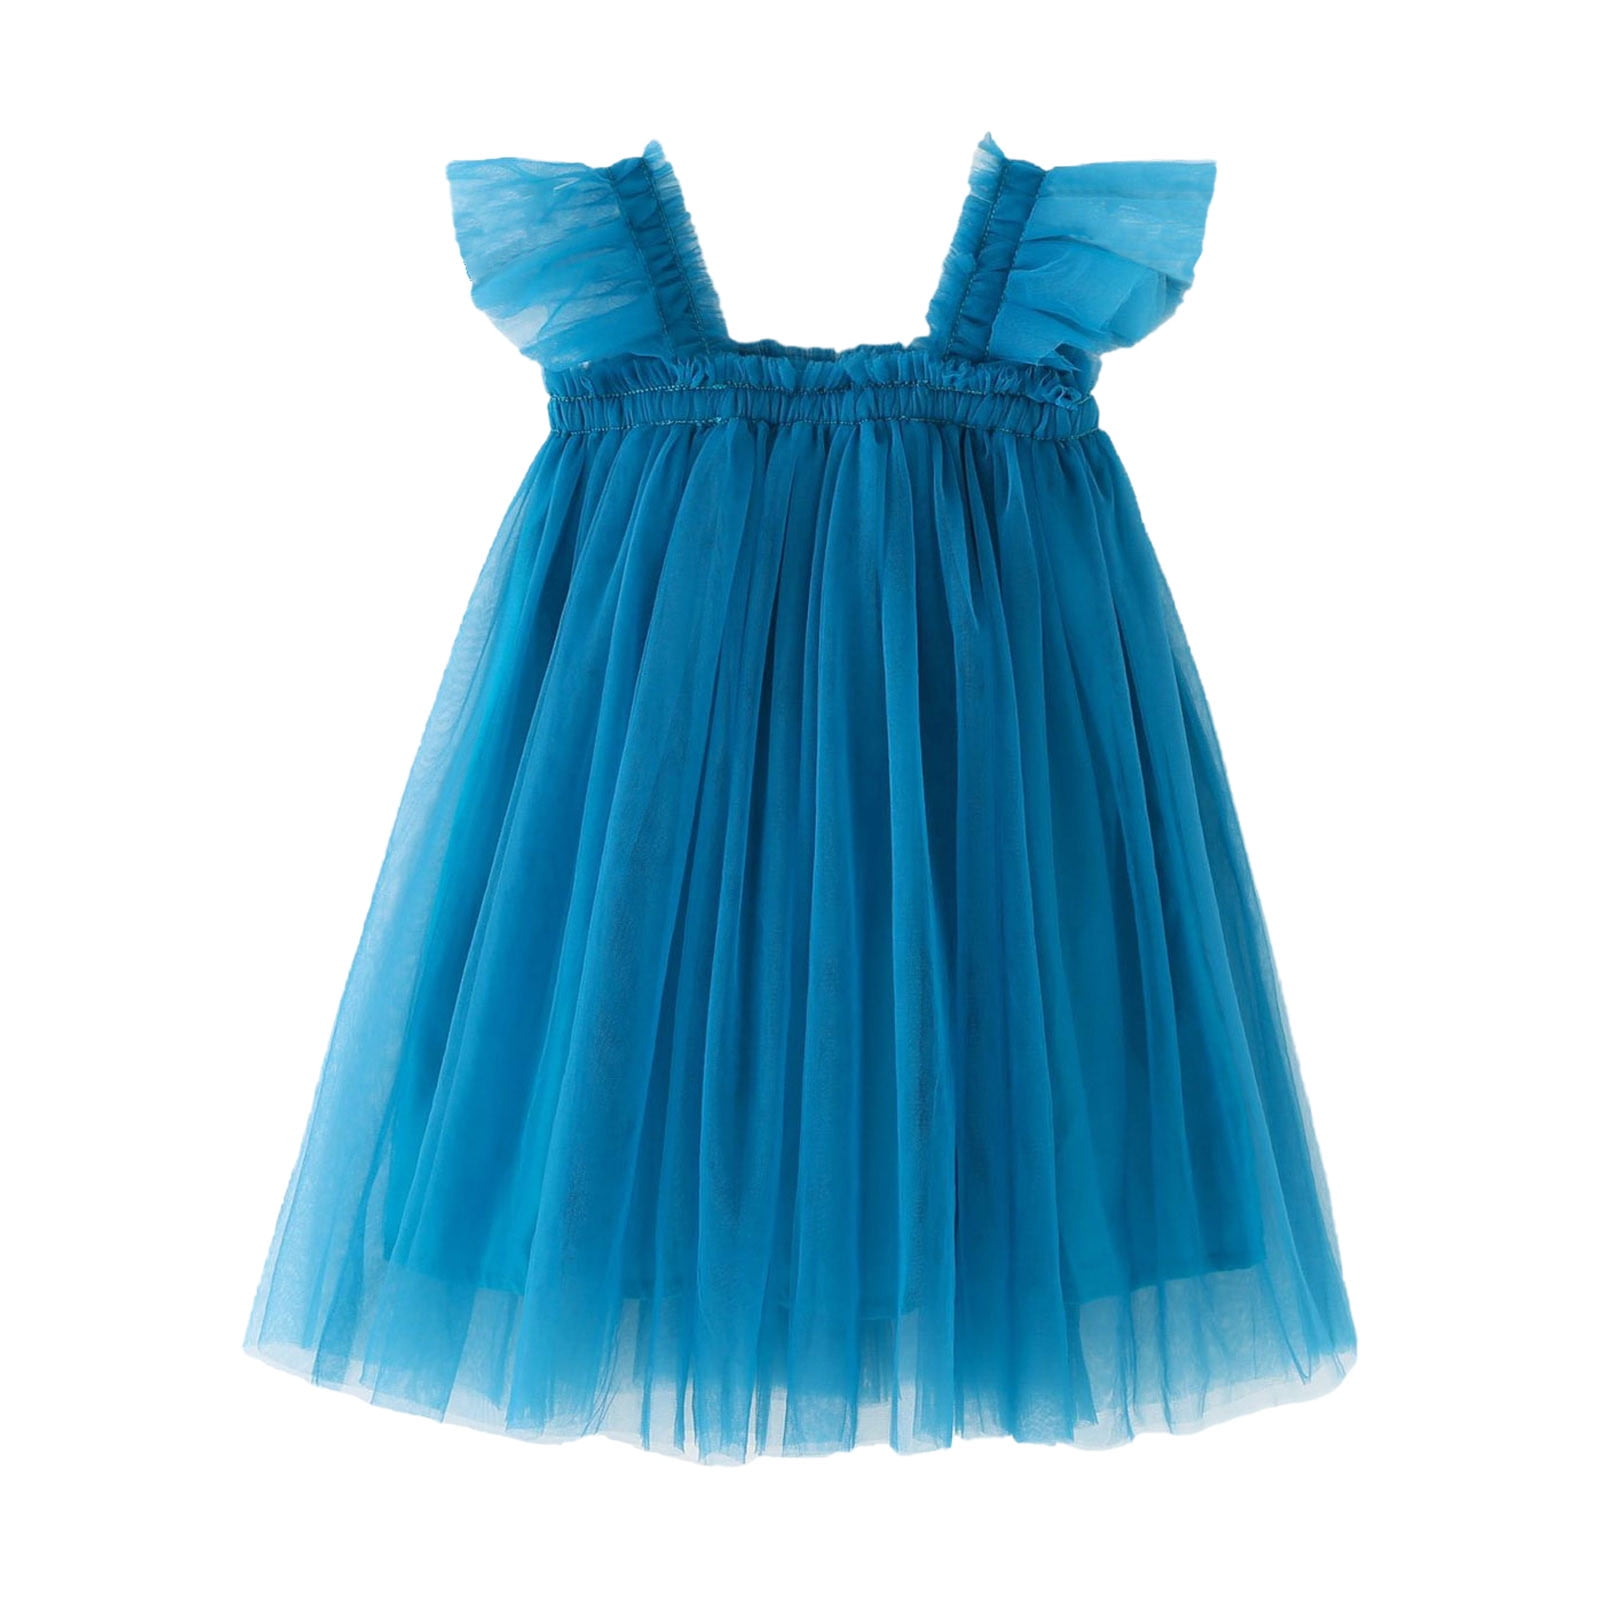 ZIZOCWA Maxi Dress for Girls 10-12 Toddler Girls Fly Sleeve Solid Tulle ...